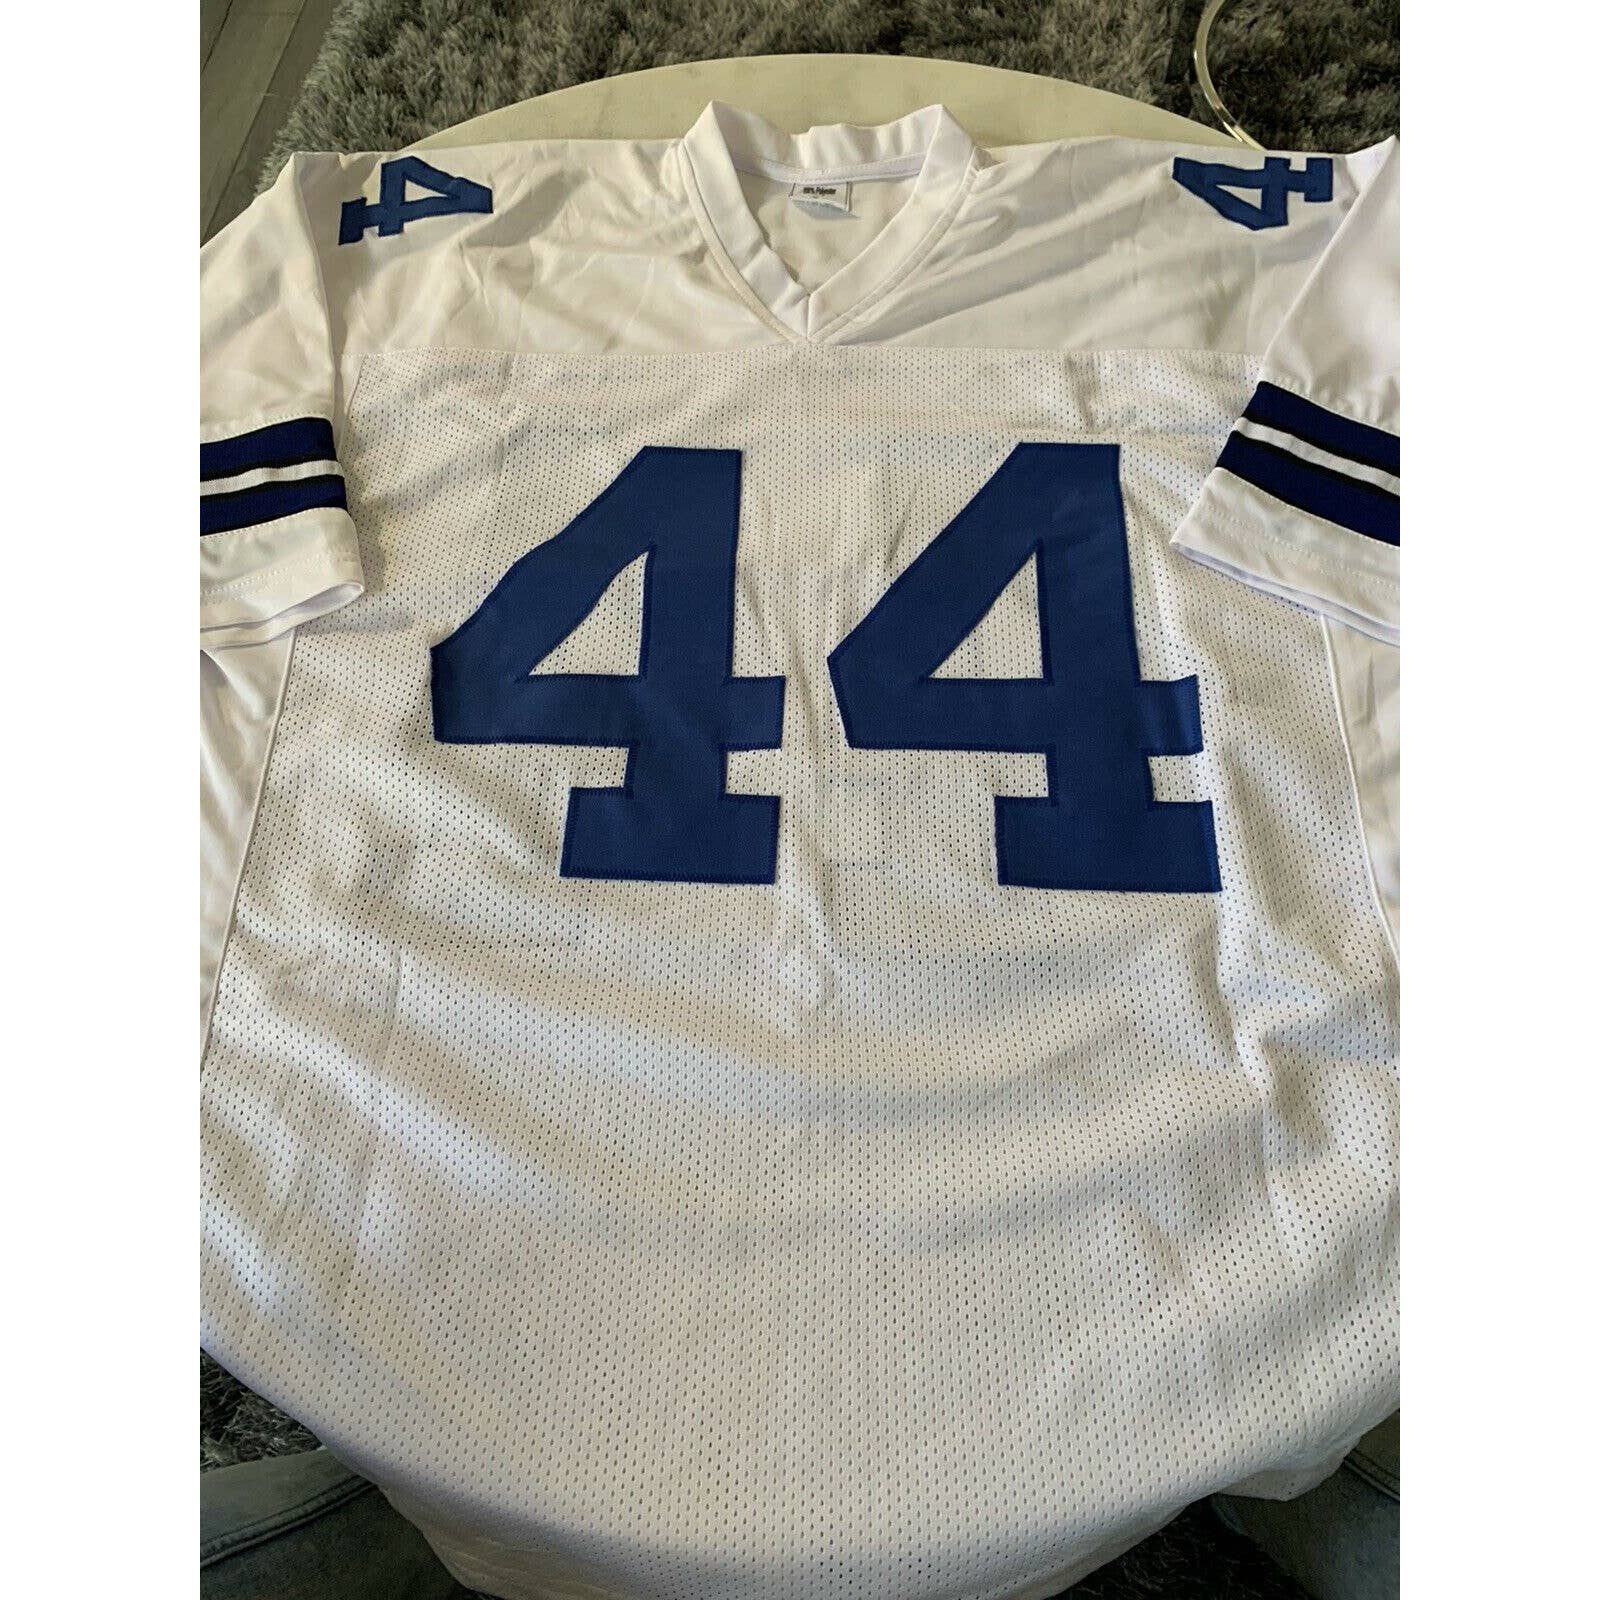 Lincoln Coleman Autographed/Signed Jersey PSA/DNA Sticker Dallas Cowboys - TreasuresEvolved